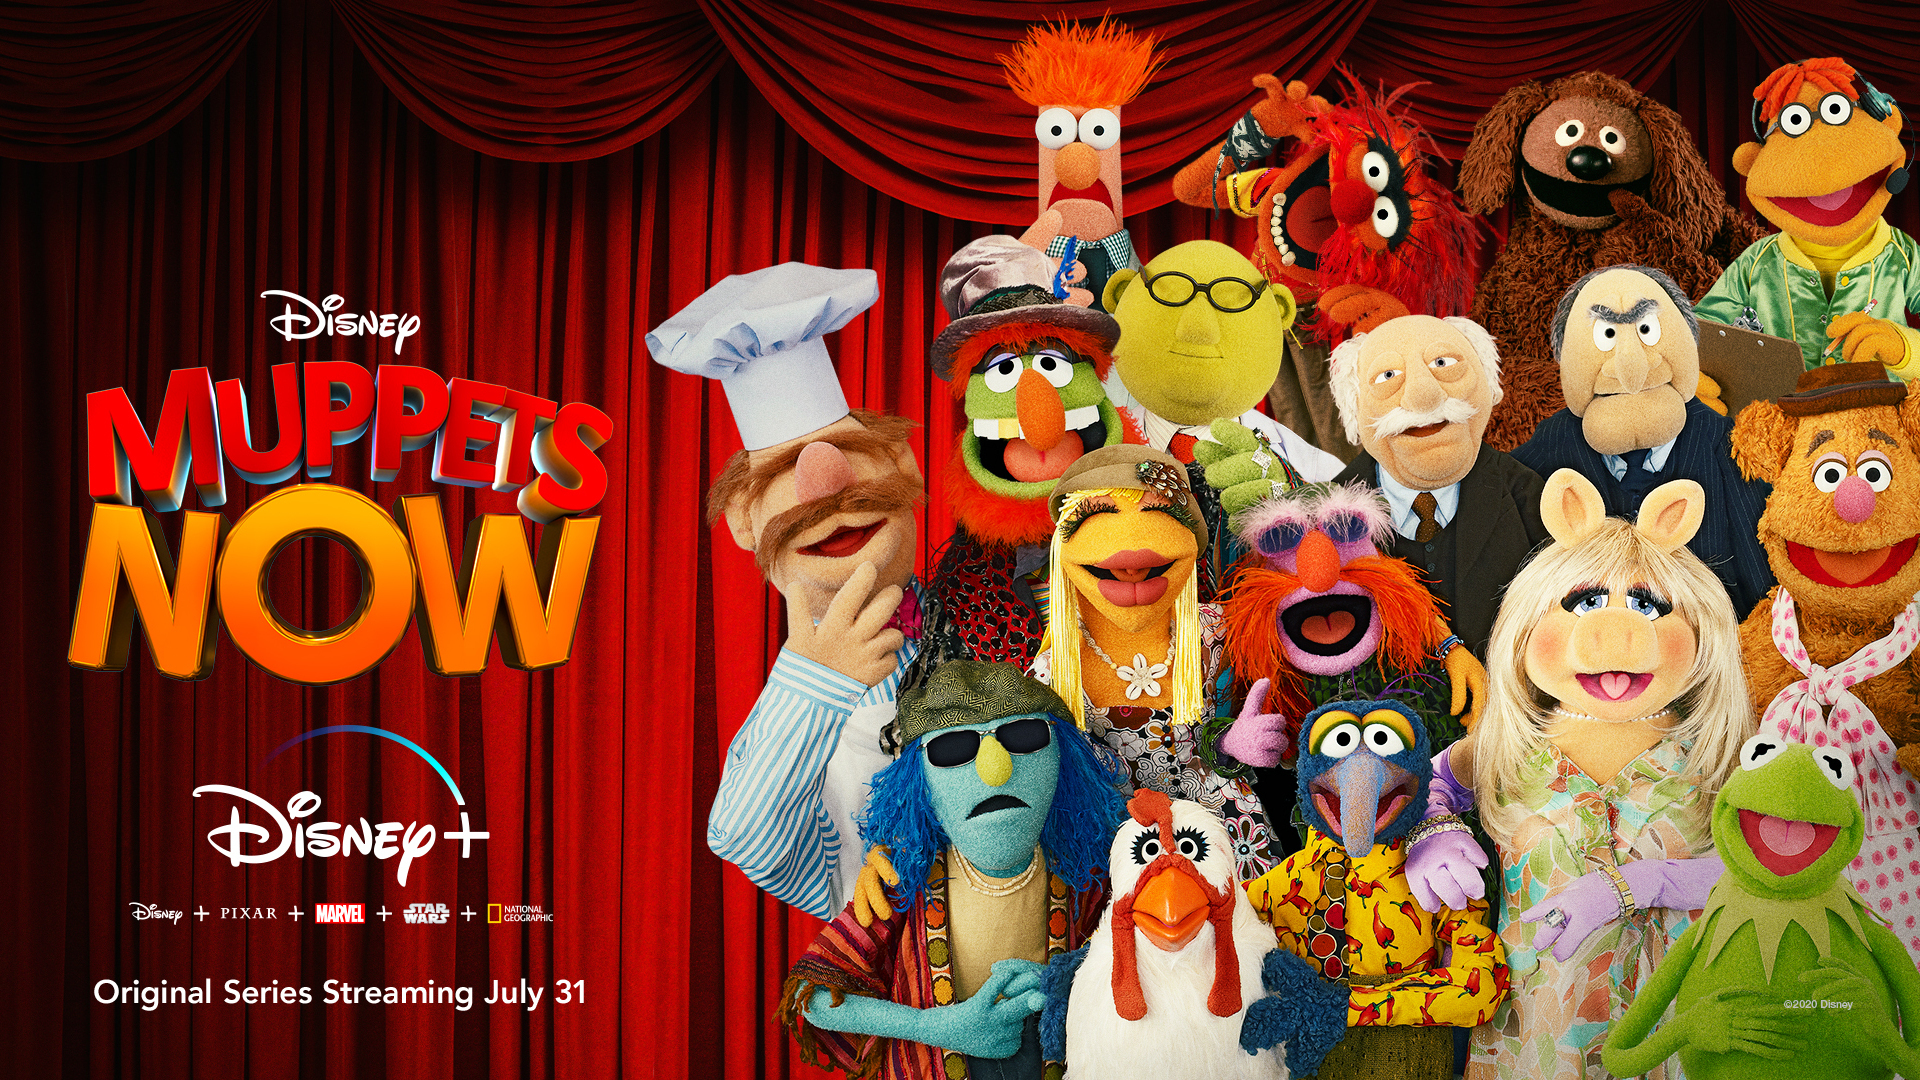 The Pig’s Out of the Bag! “Muppets Now” to Premiere July 31 on Disney+